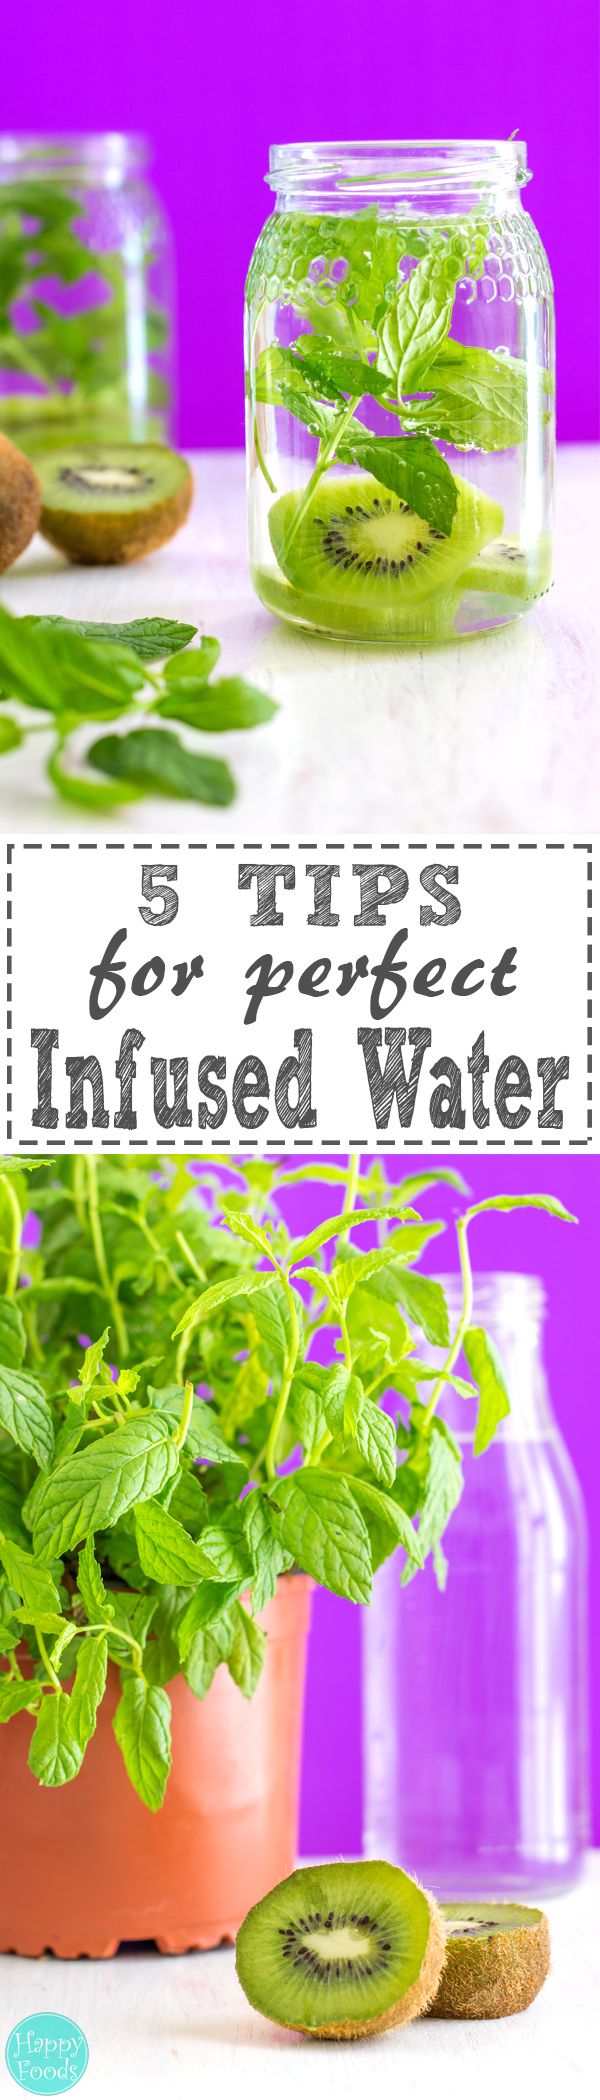 Kiwi and Mint Infused Water Recipe + 5 Tips for perfect Infused Water